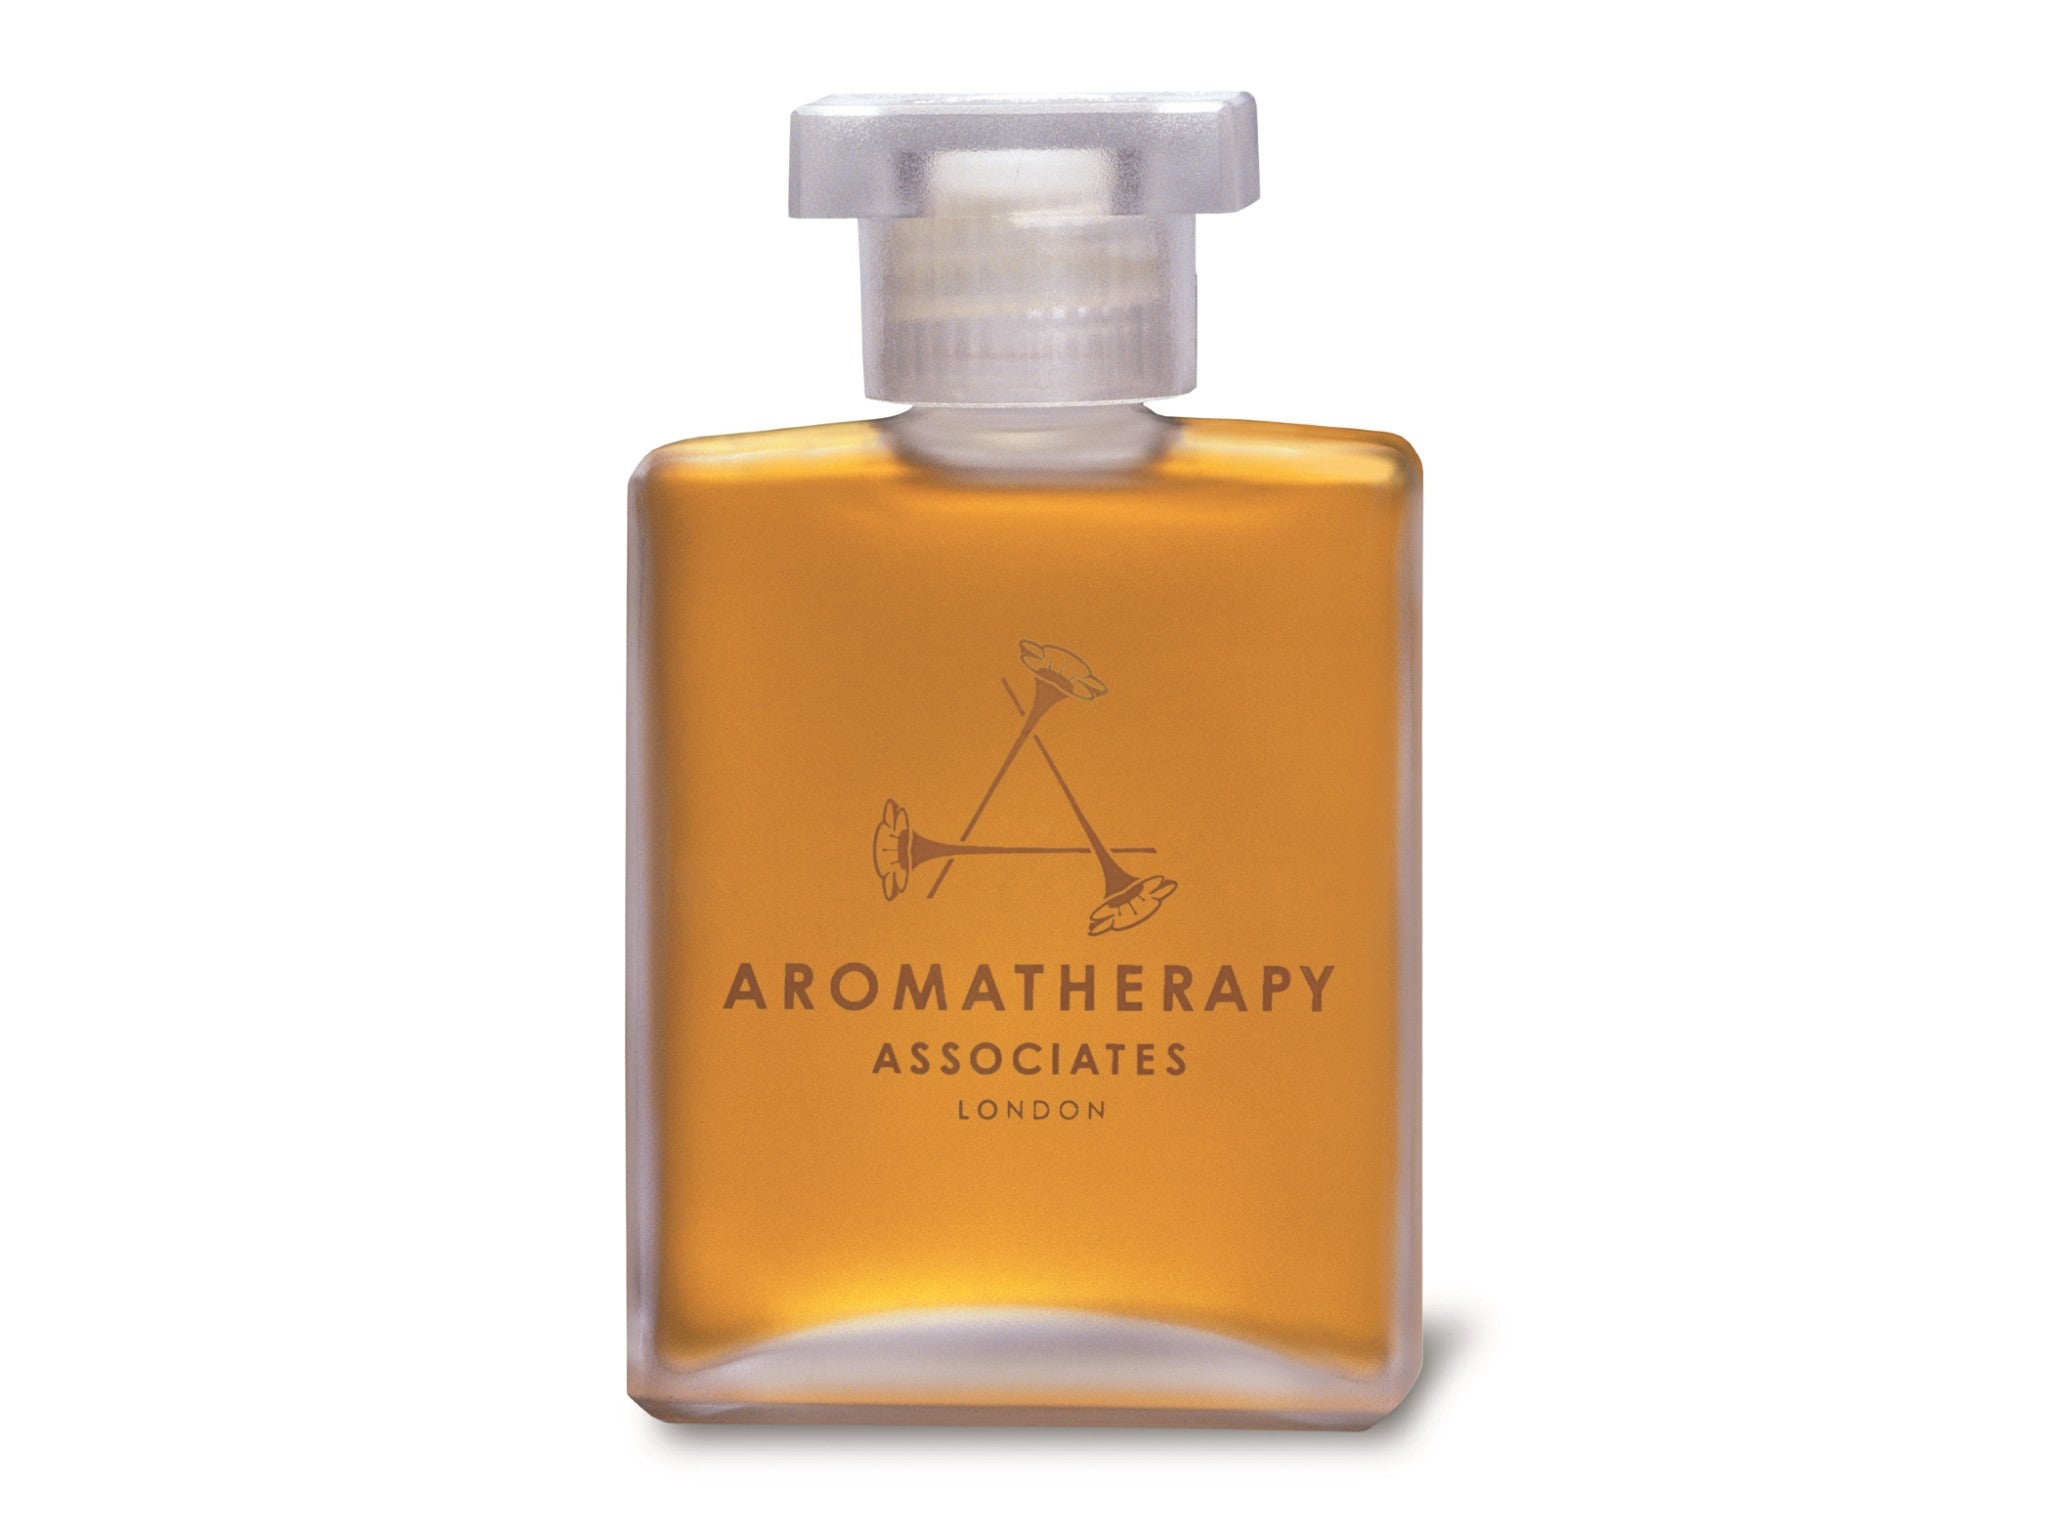 Aromatherapy Associates deep relax bath and shower oil, indybest.jpeg